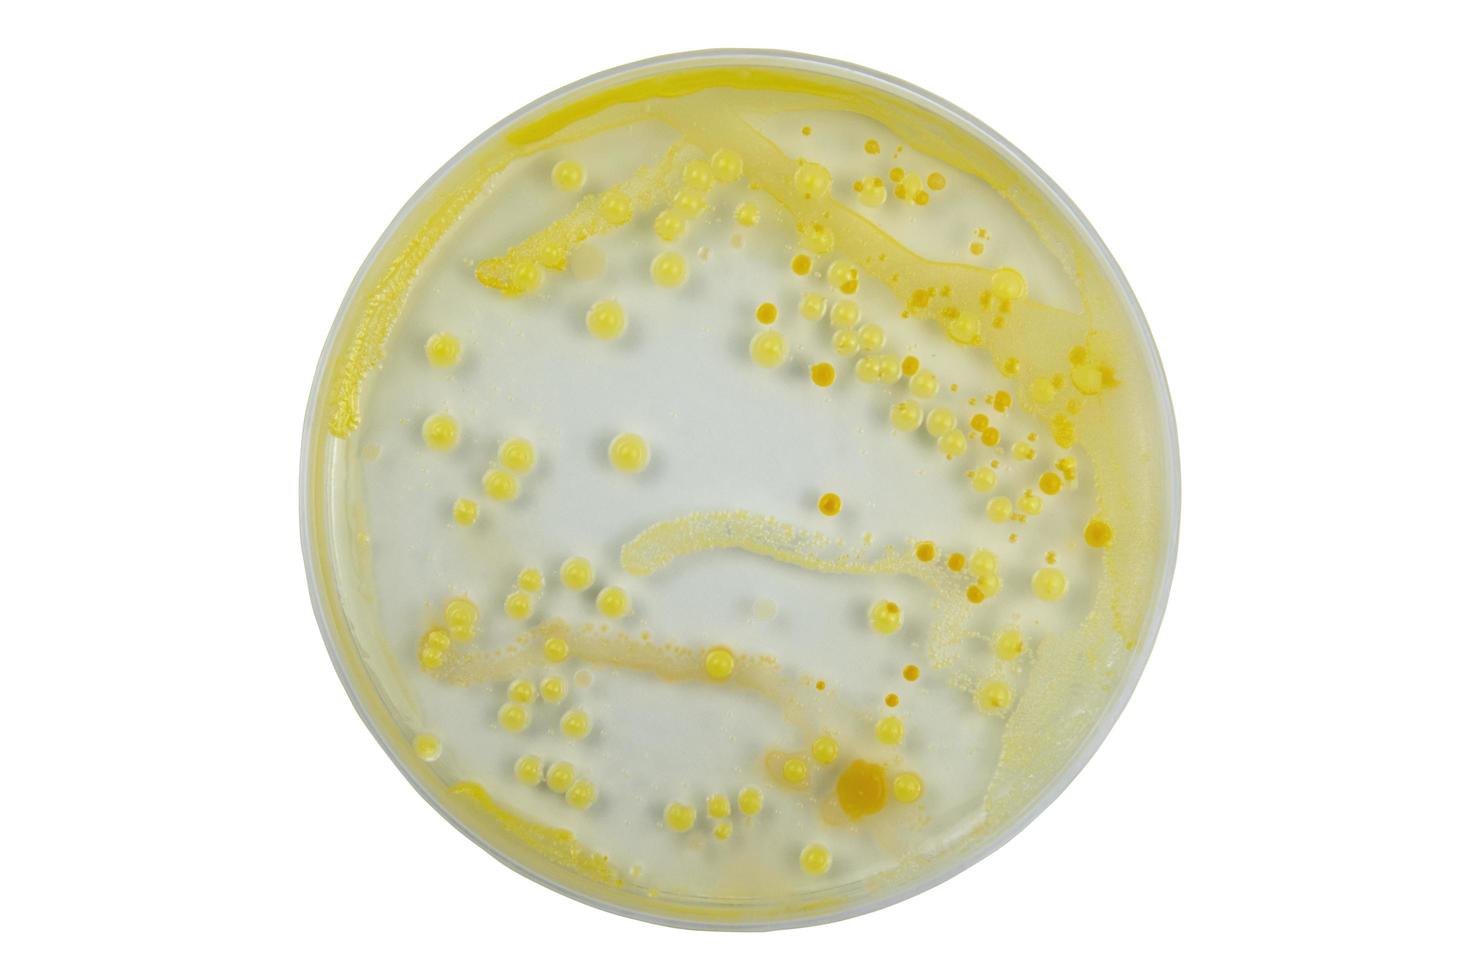 Top view of petri dish and culture media with bacteria on white background with clipping, solid media, nutrient agar, Test various germs, virus, Coronavirus, Corona, COVID-19, Food, Food science. photo